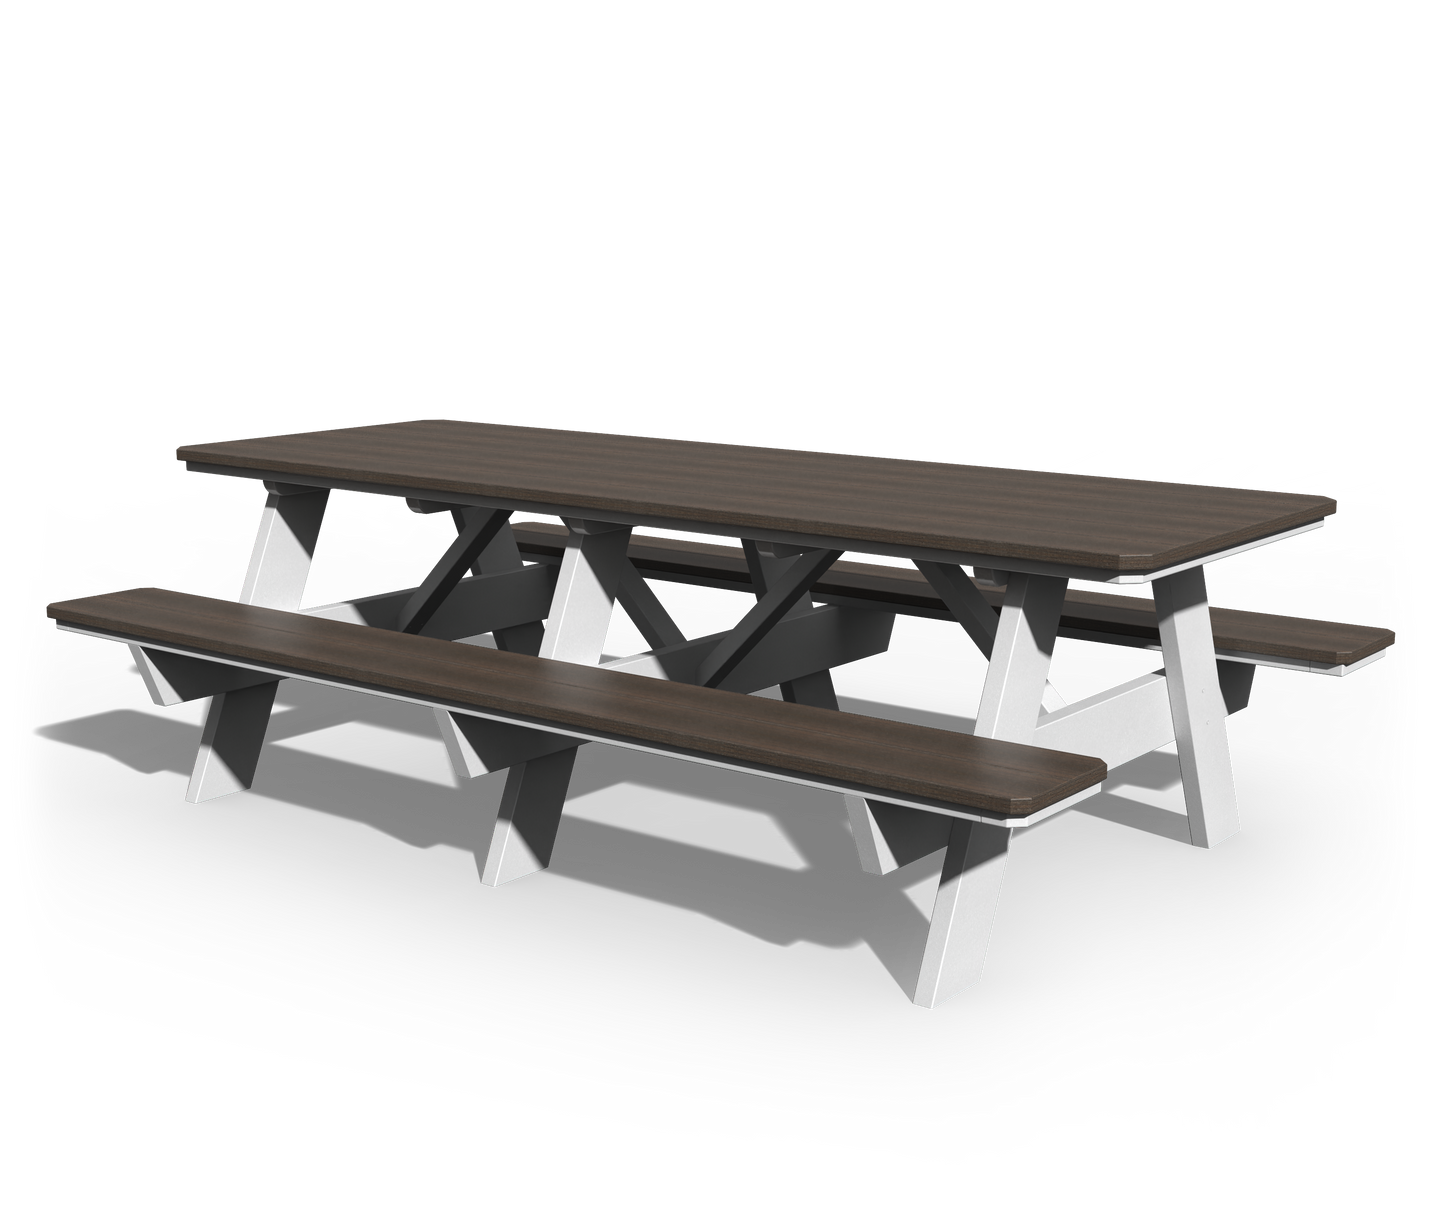 Patiova Recycled Plastic 3'x8' Picnic Table with Seats Attached - LEAD TIME TO SHIP 3 WEEKS